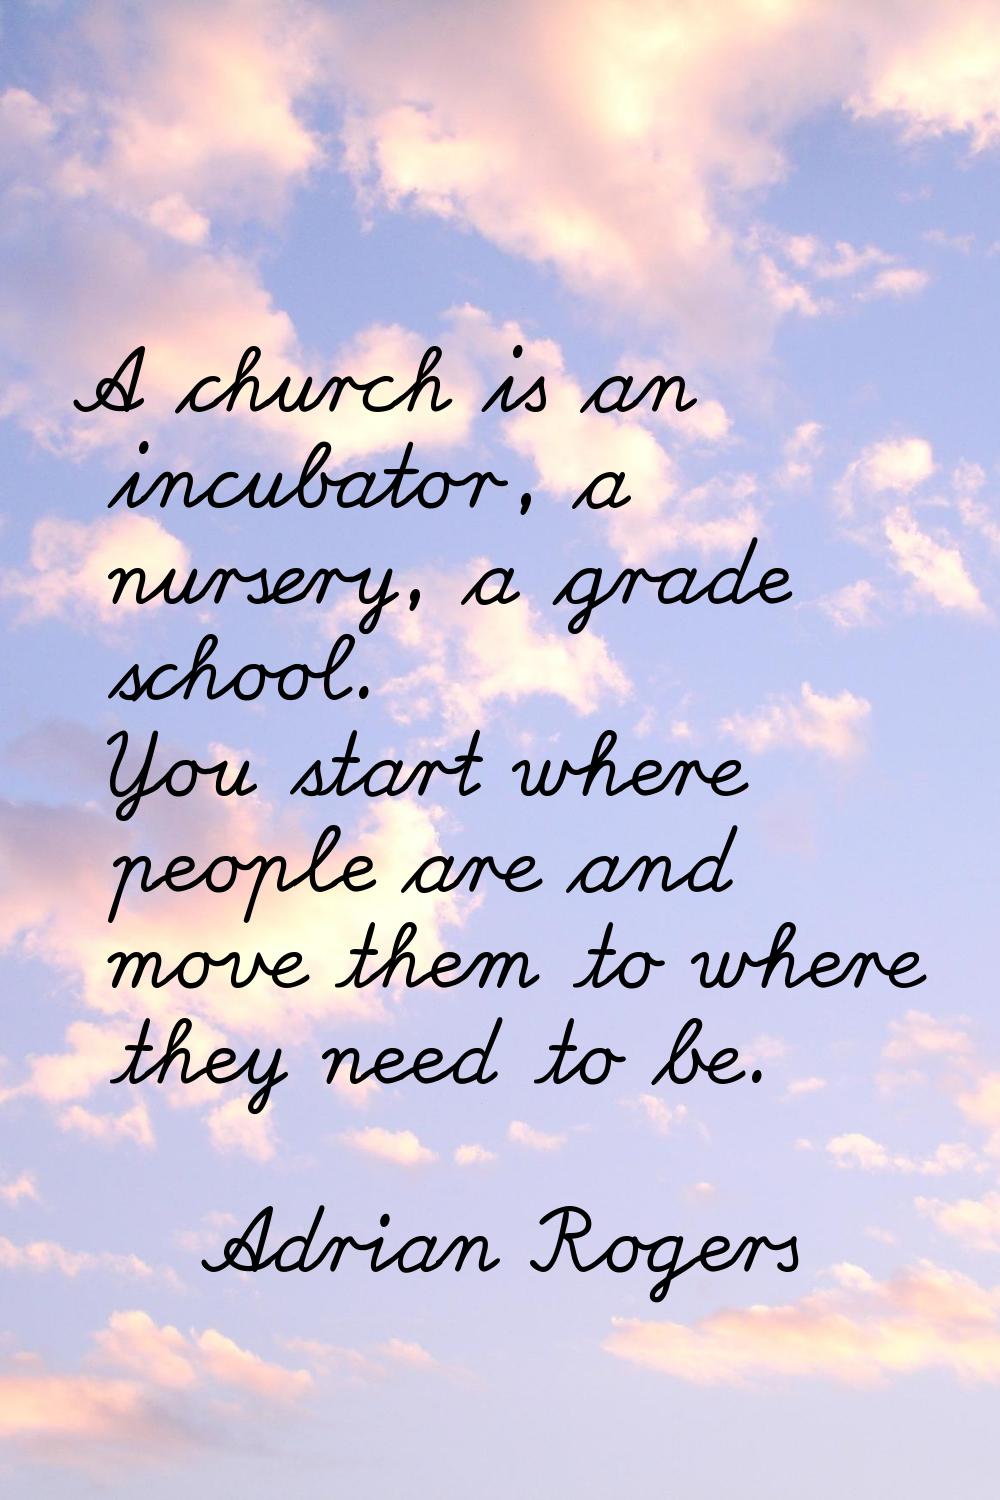 A church is an incubator, a nursery, a grade school. You start where people are and move them to wh